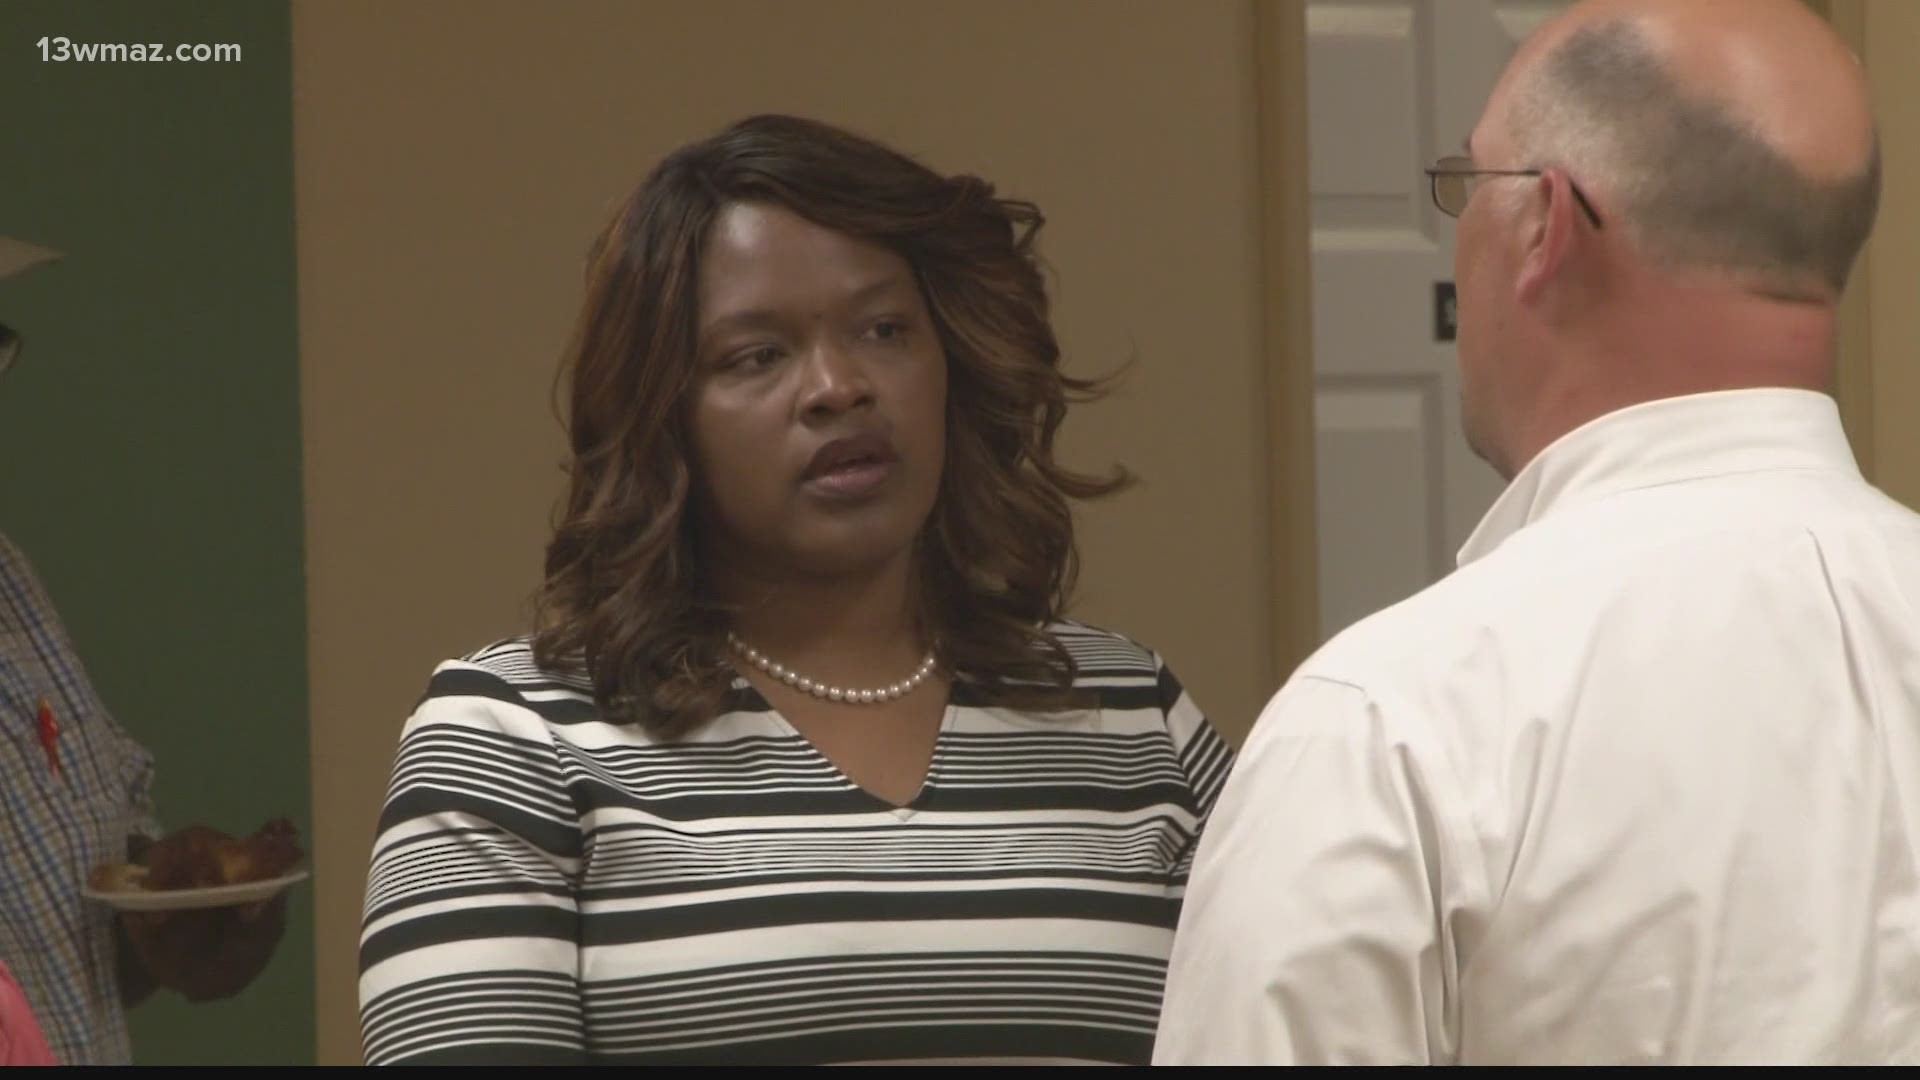 Public records show that some of 16 people people arrested made campaign contributions to Bibb County's new district attorney, Anita Reynolds Howard.